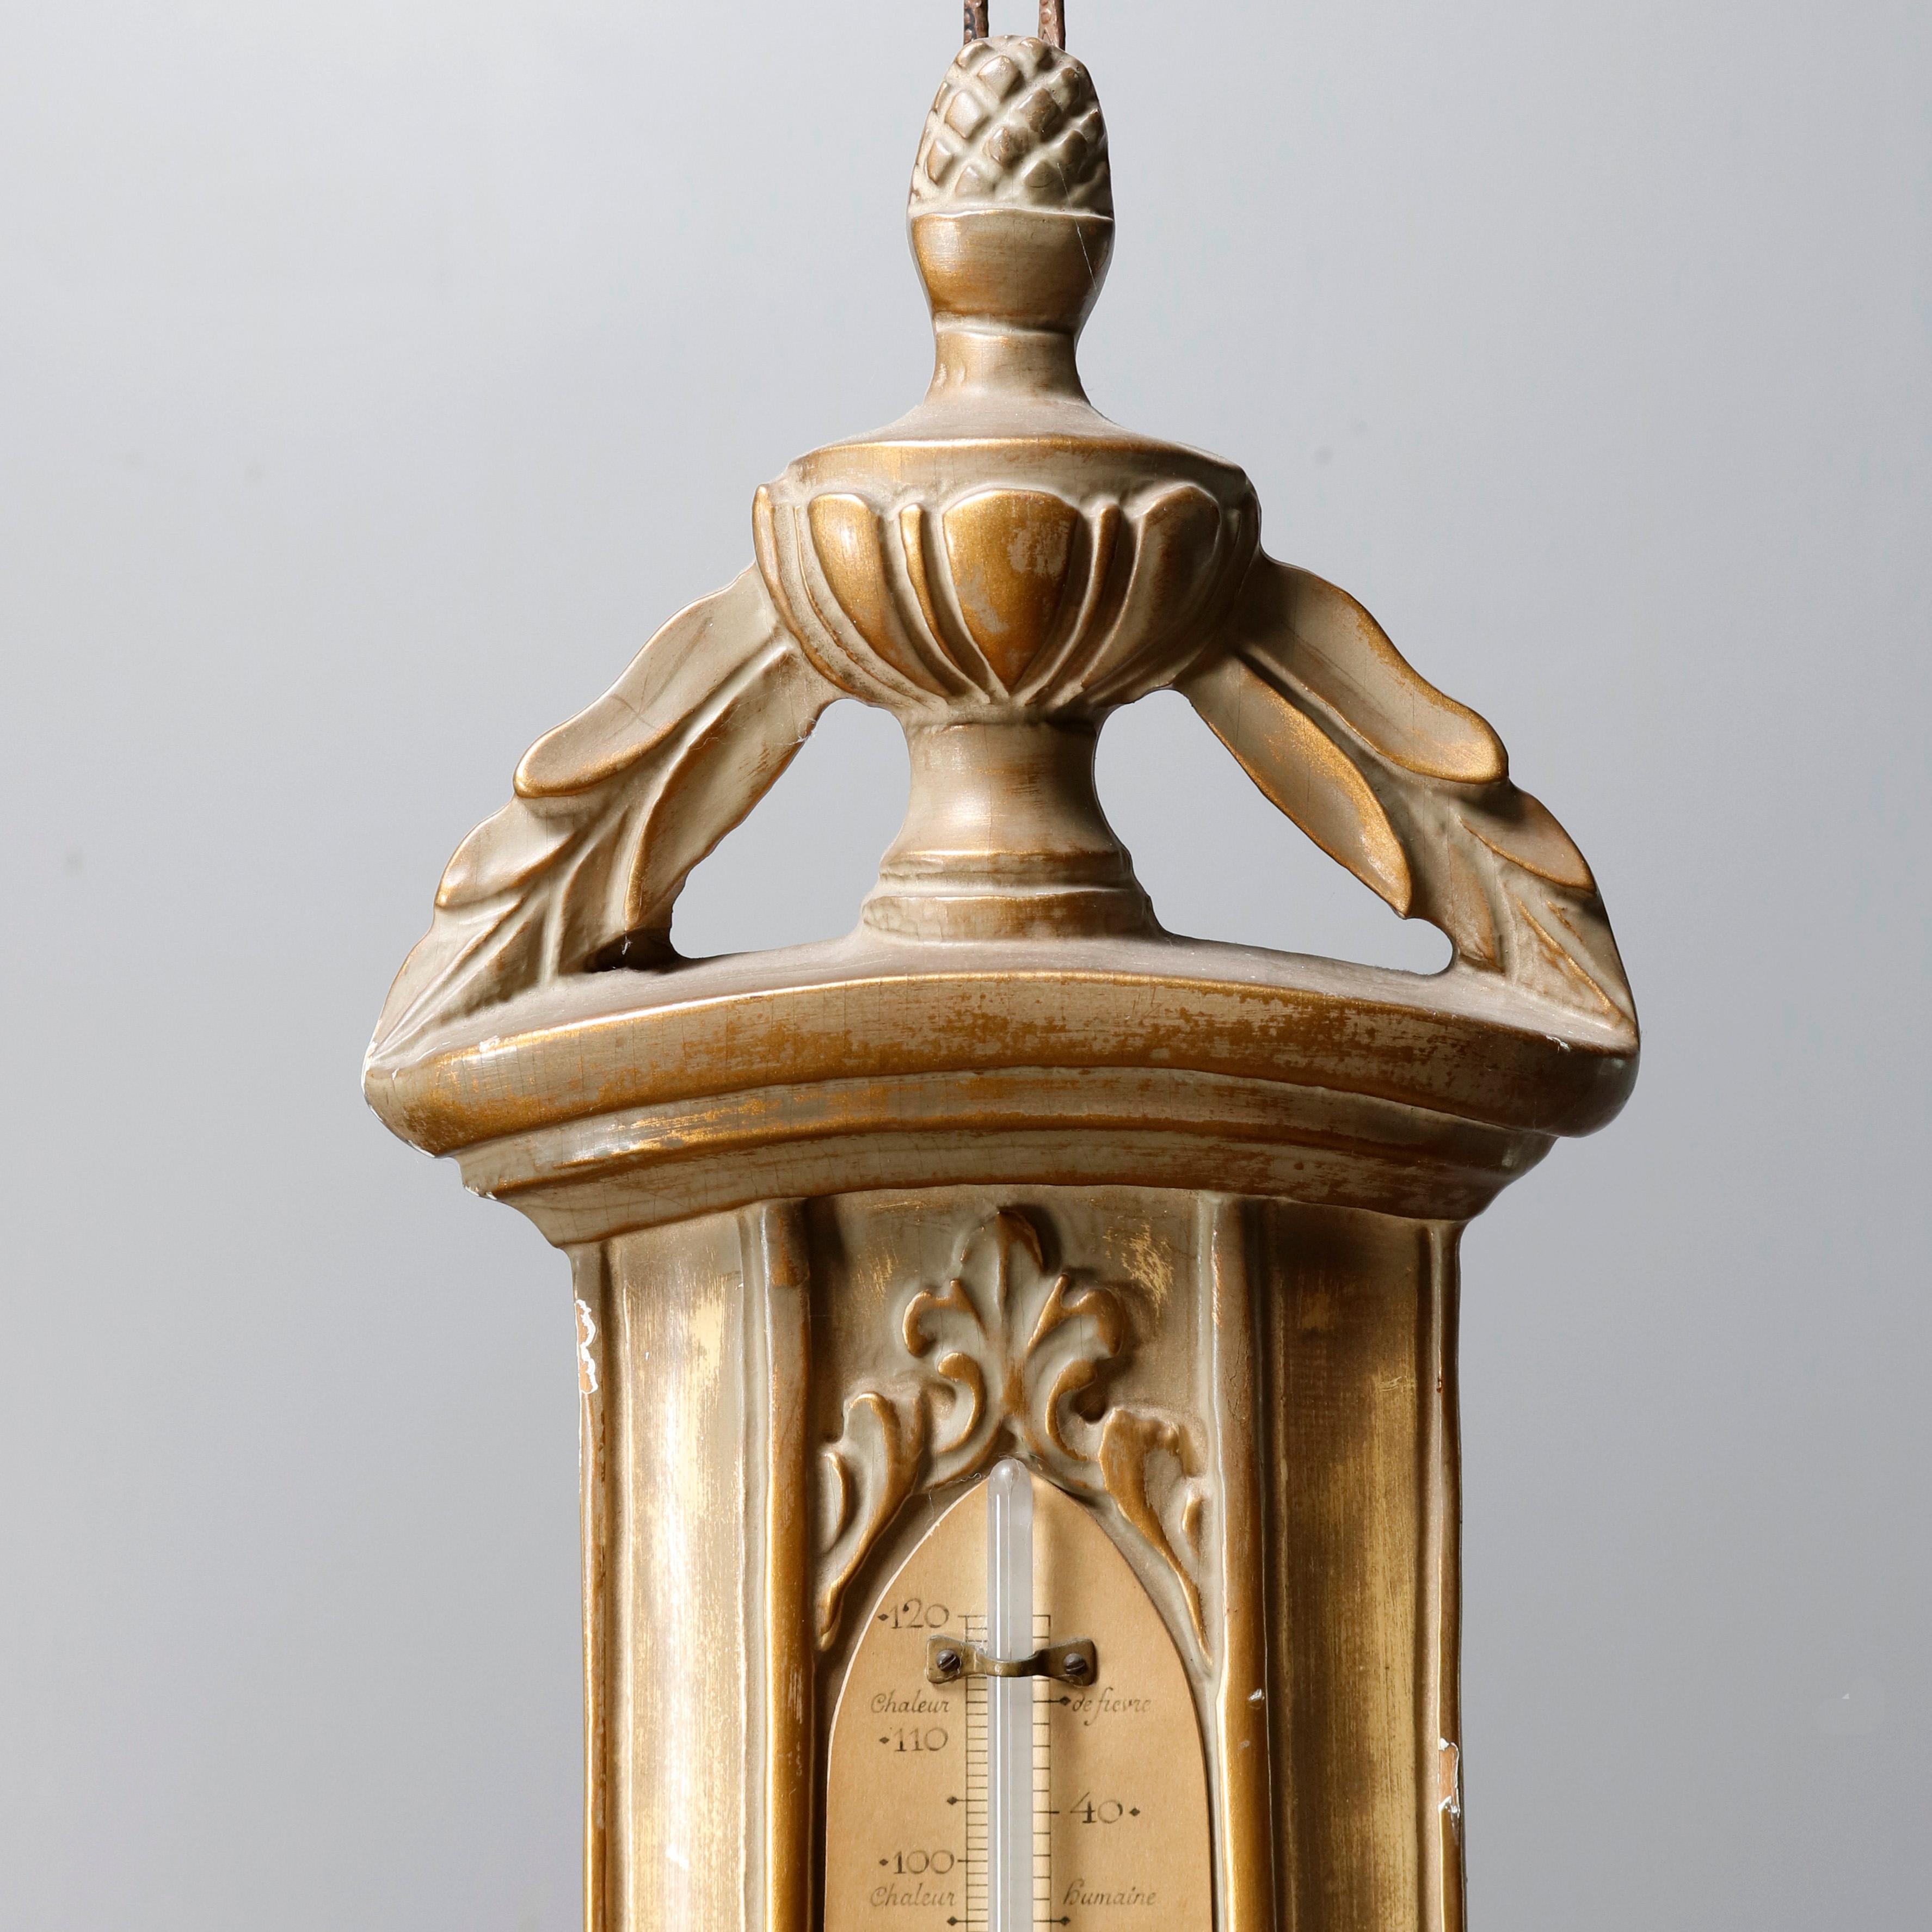 Giltwood Contemporary French Neoclassical Styled Wall Barometer, Bollenbach, 20th Century